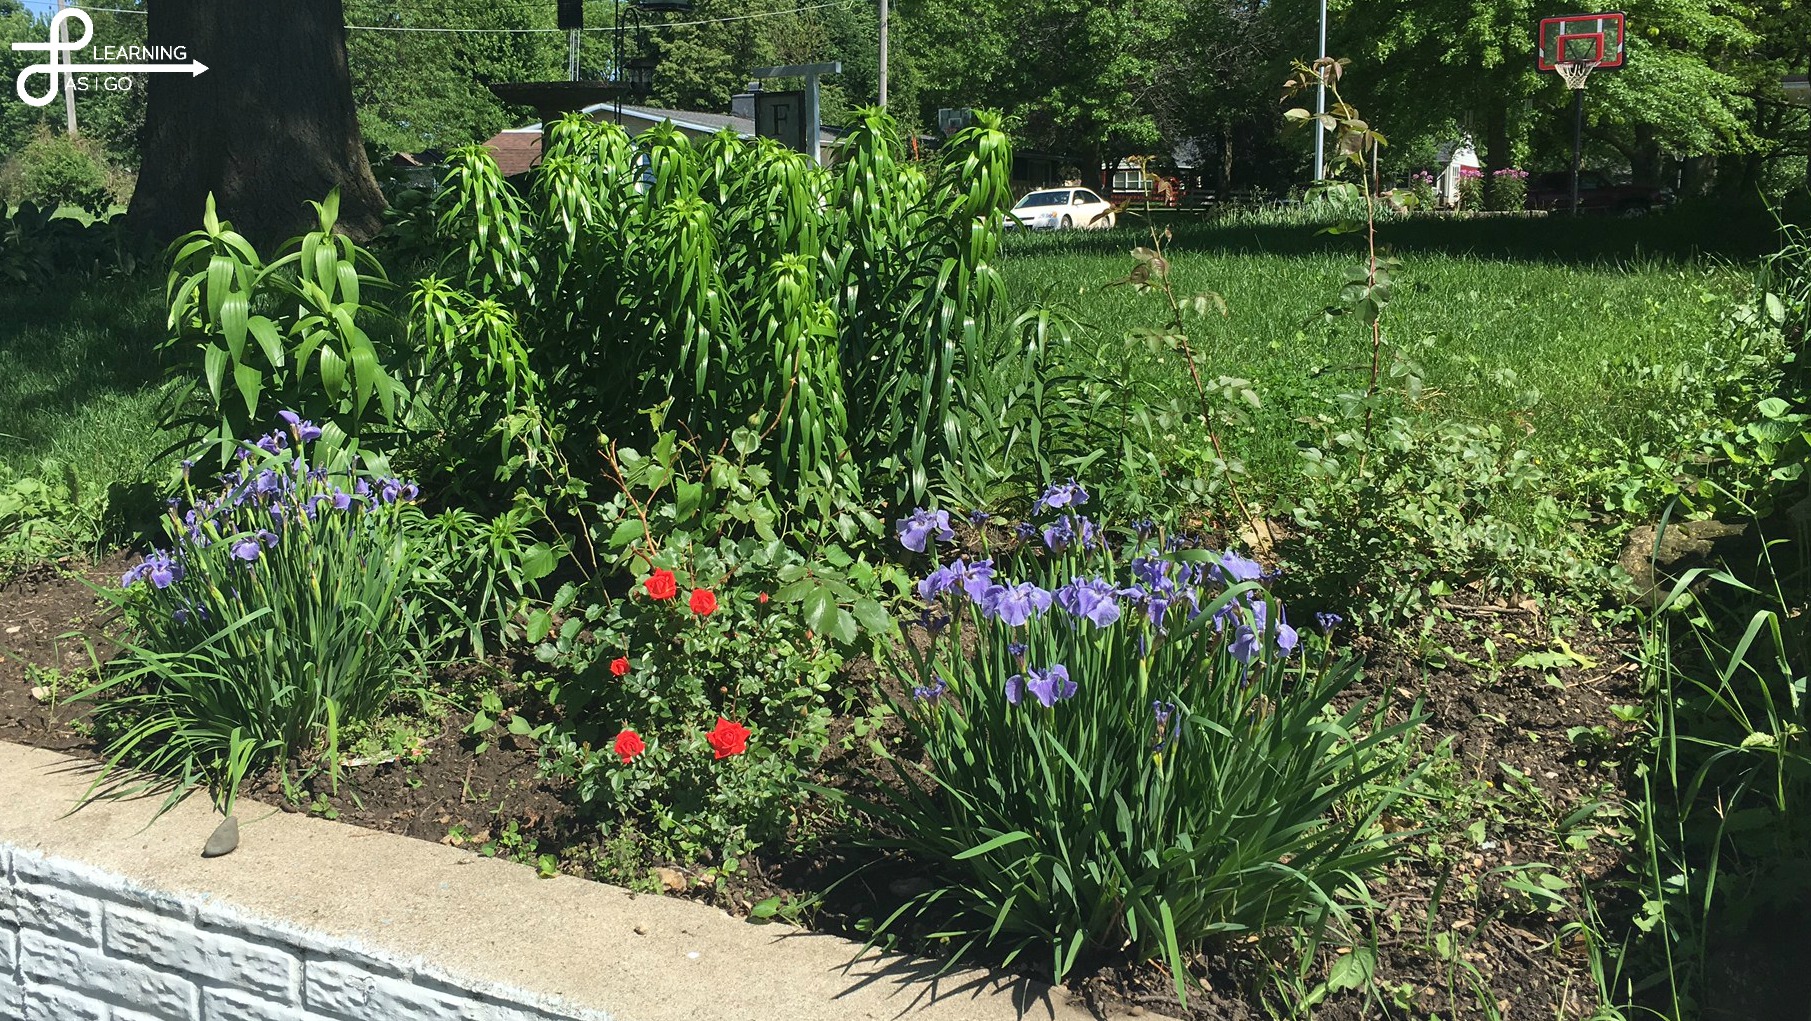 Flower Gardens: May 30th